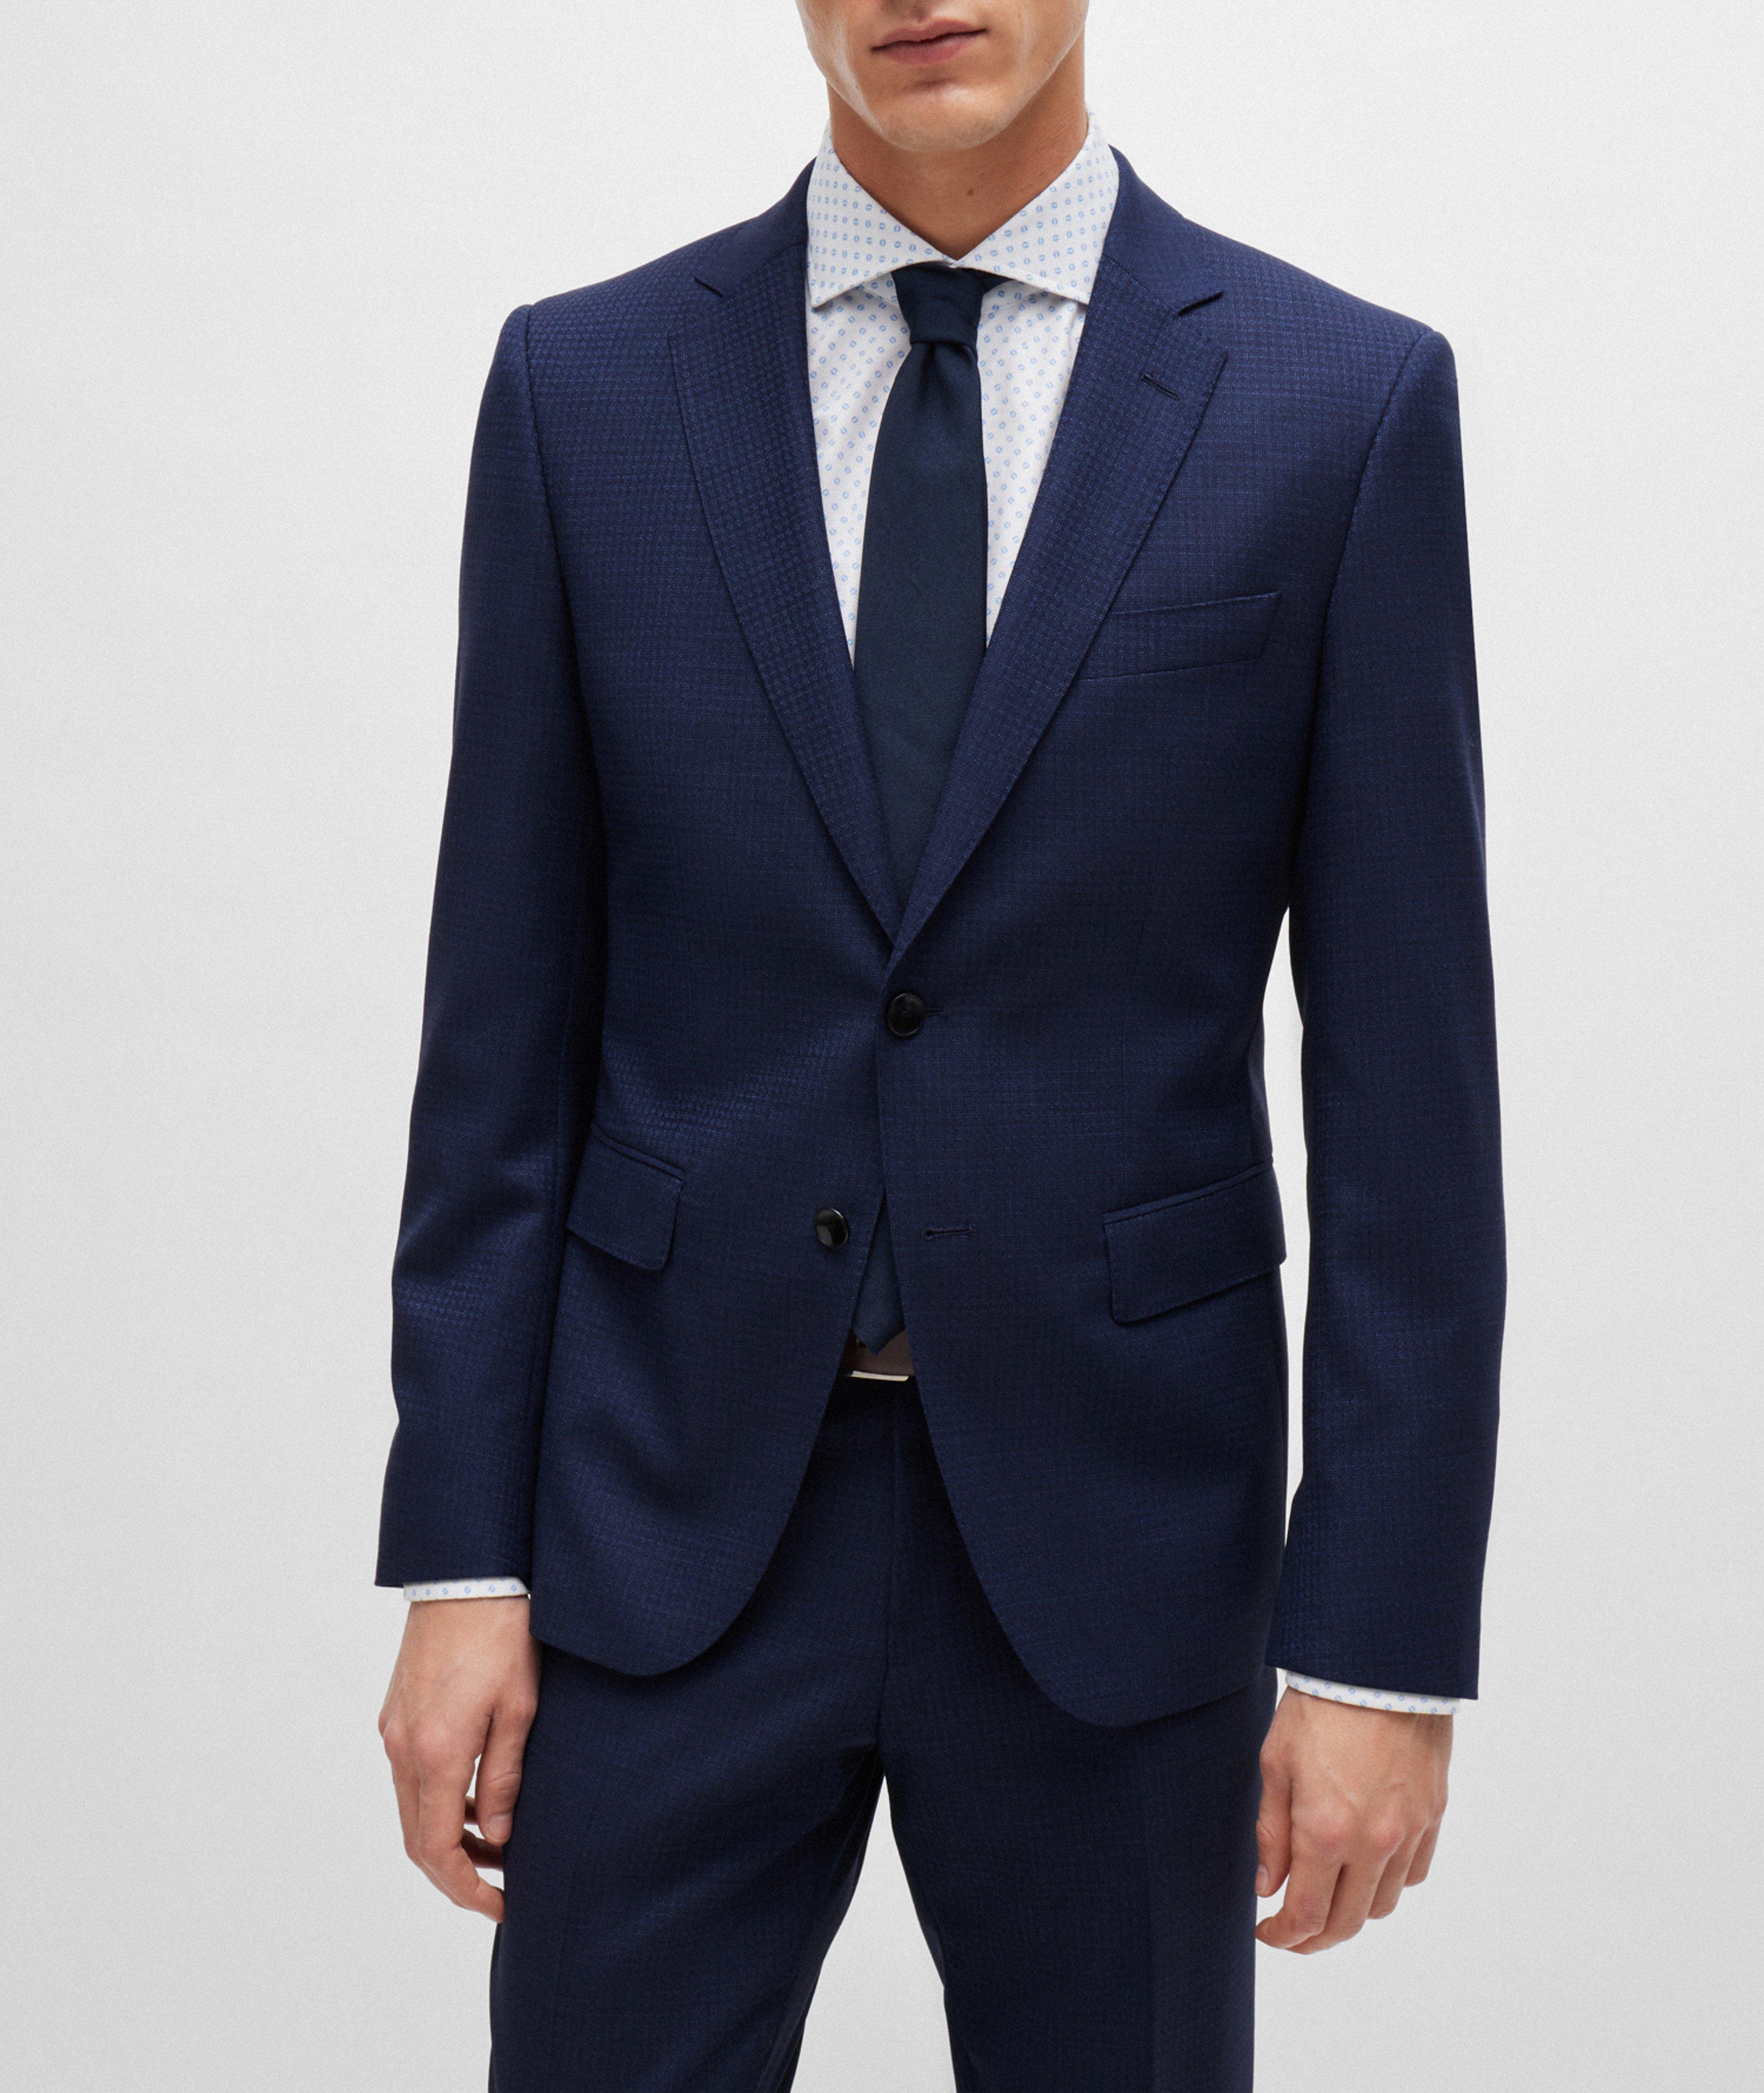 Checked Slim-Fit Suit image 1